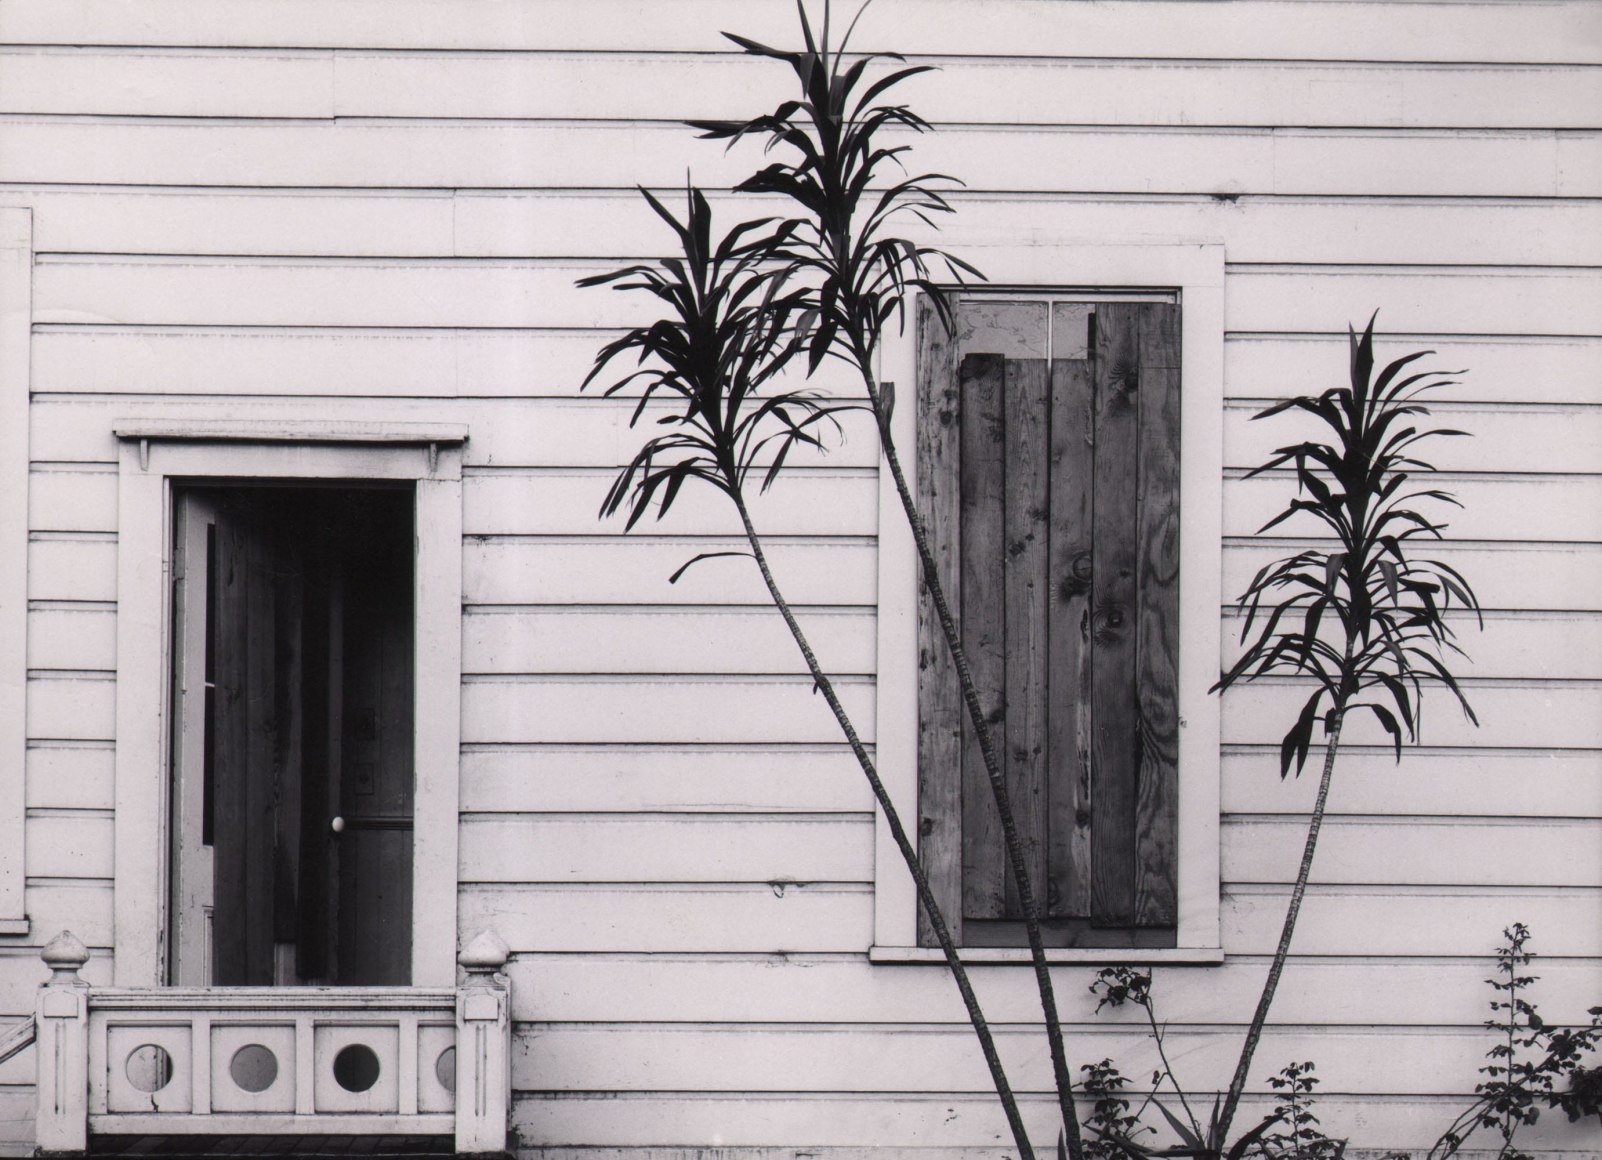 Pirkle Jones, Untitled, ​c. 1955&ndash;1960. Detail of a white house with an open door and shuttered window. A tall plant grows in front of the window.